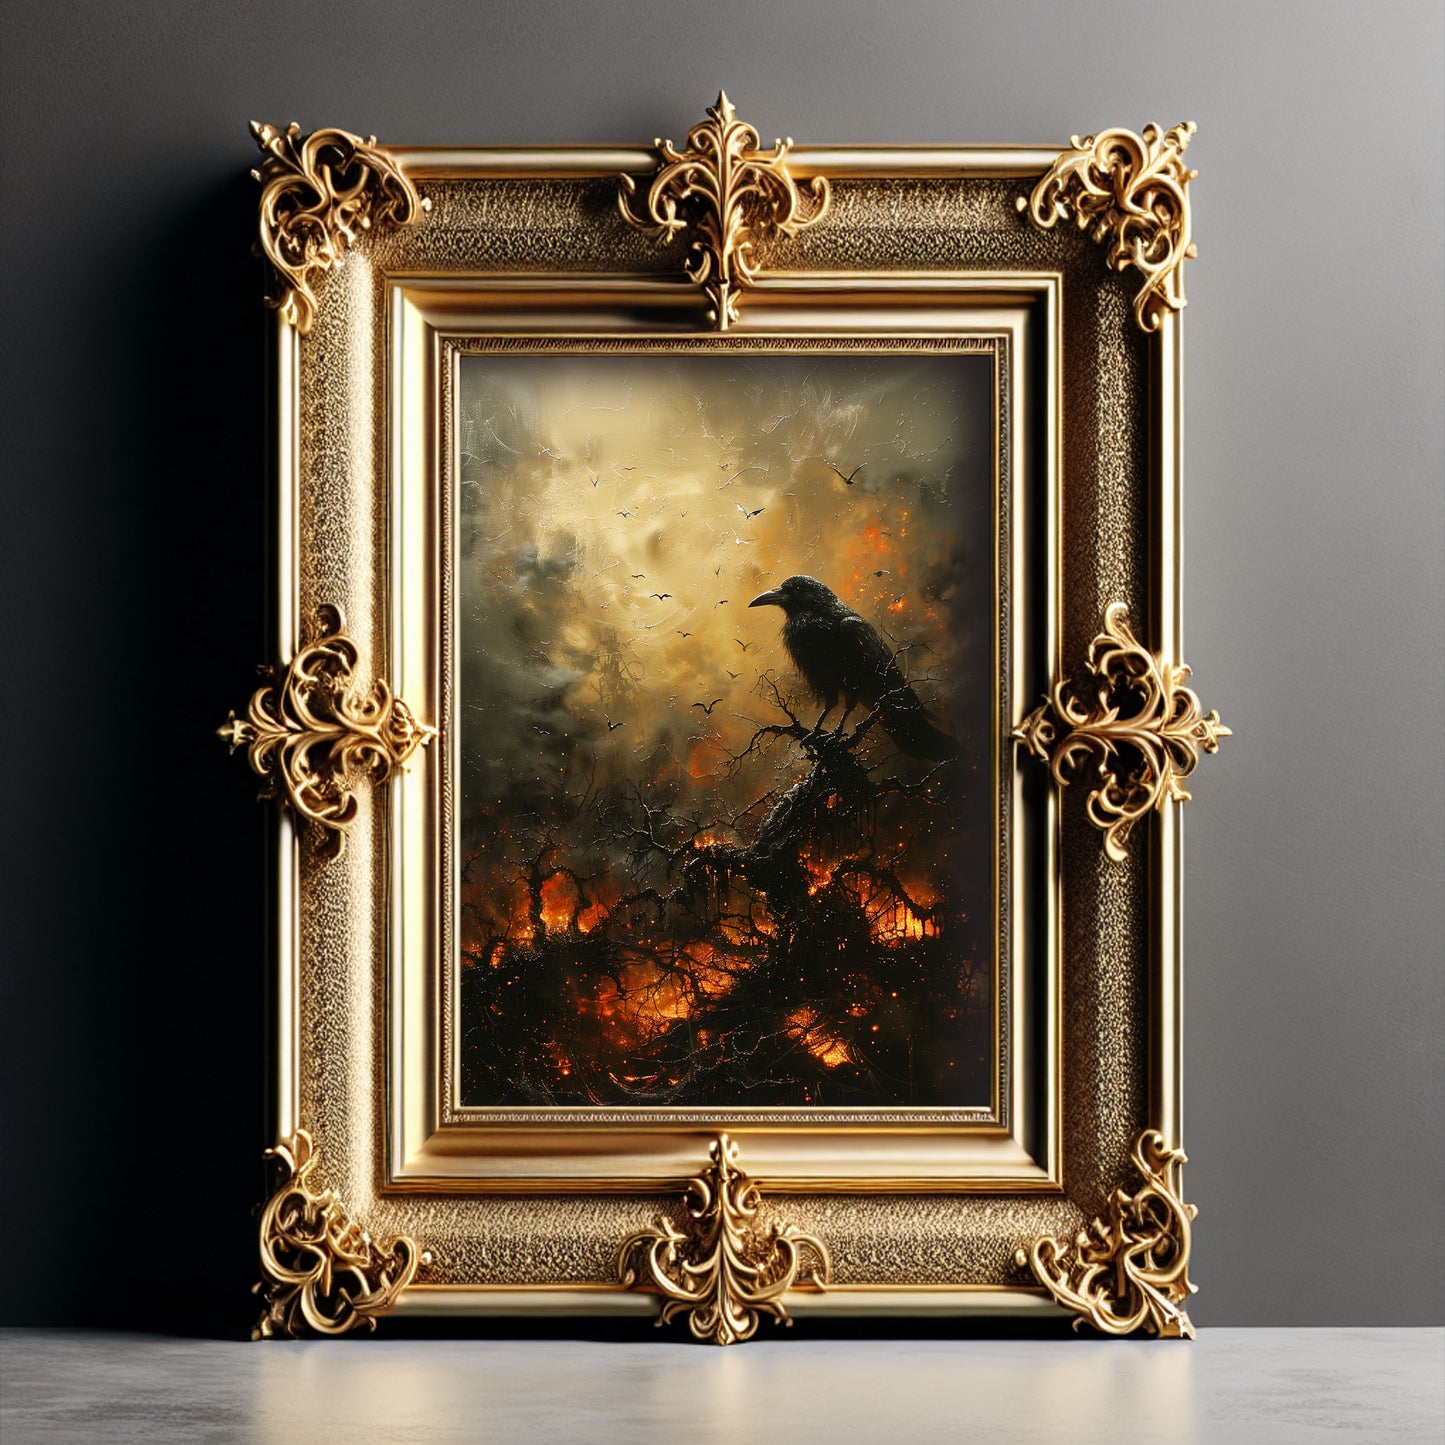 Black Crow in Burning Forest Poster - Creepy Wall Art